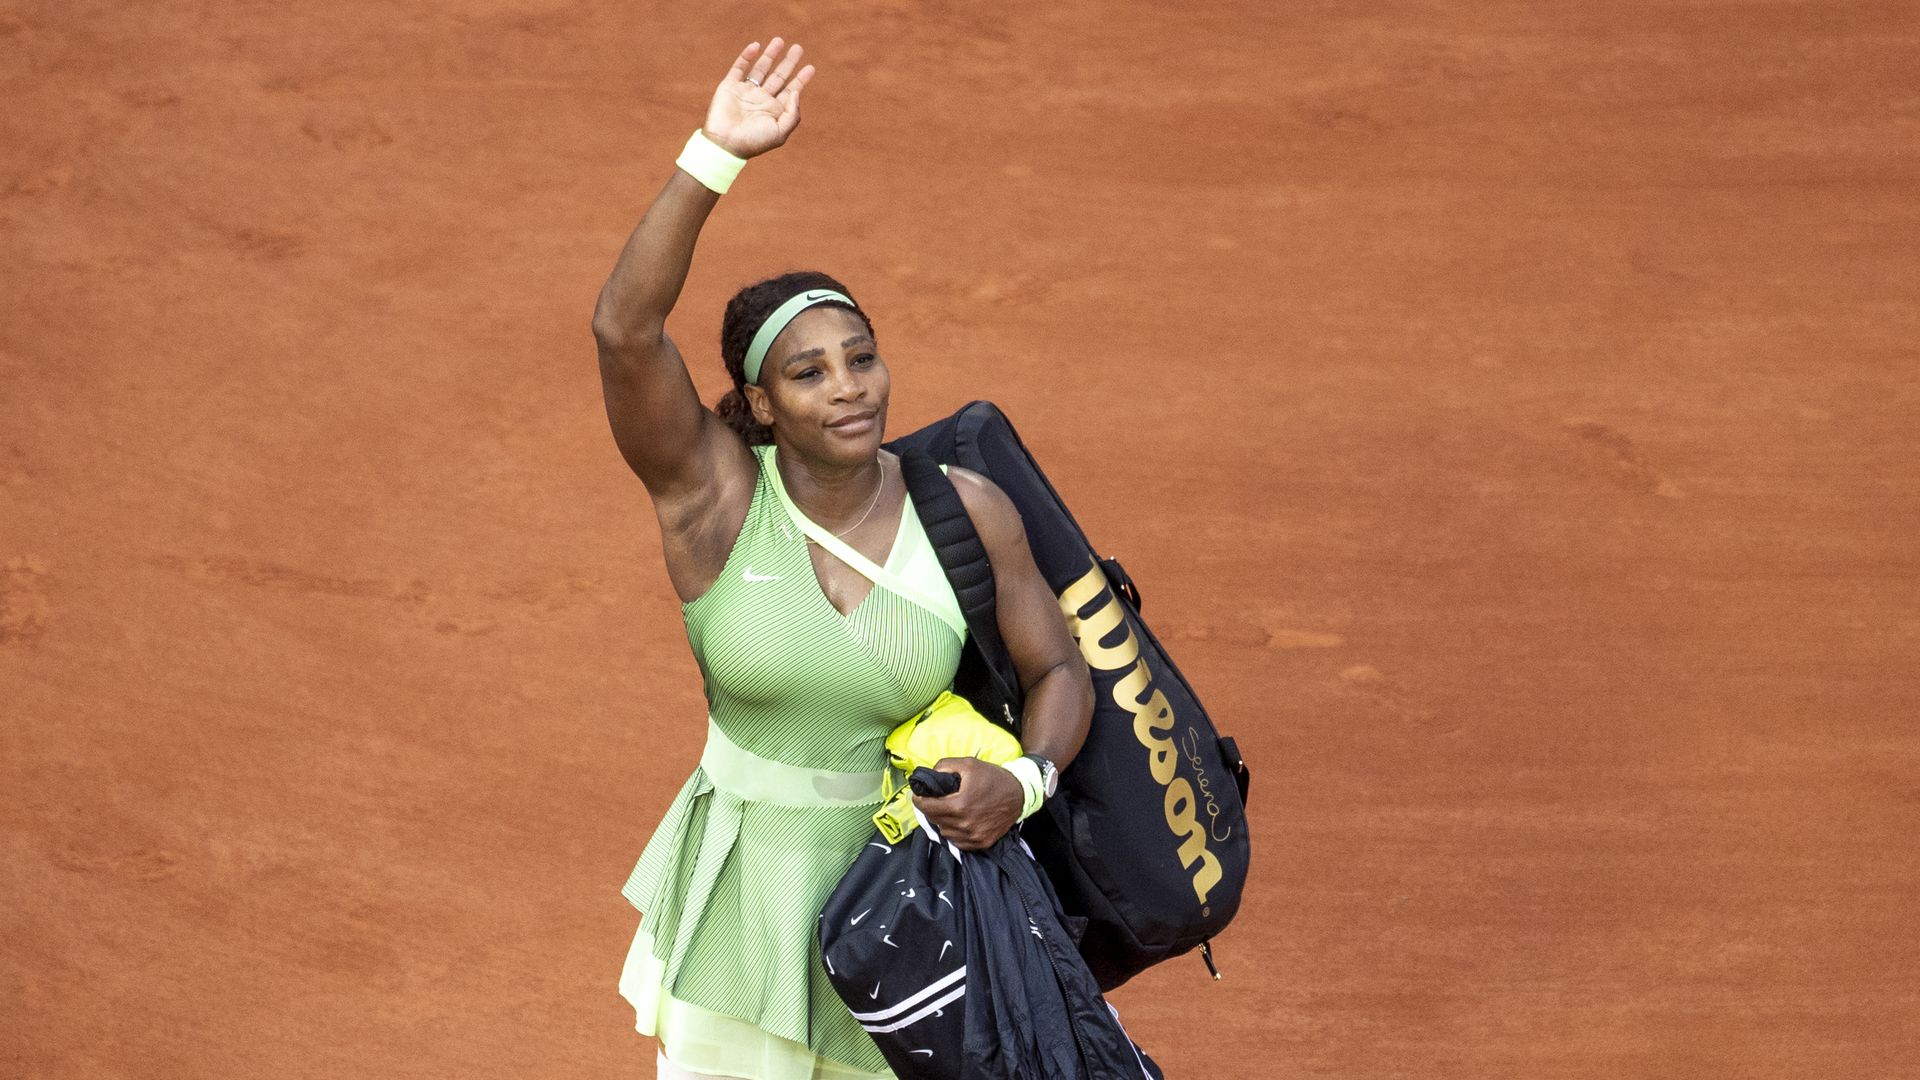 Serena Williams at French Open